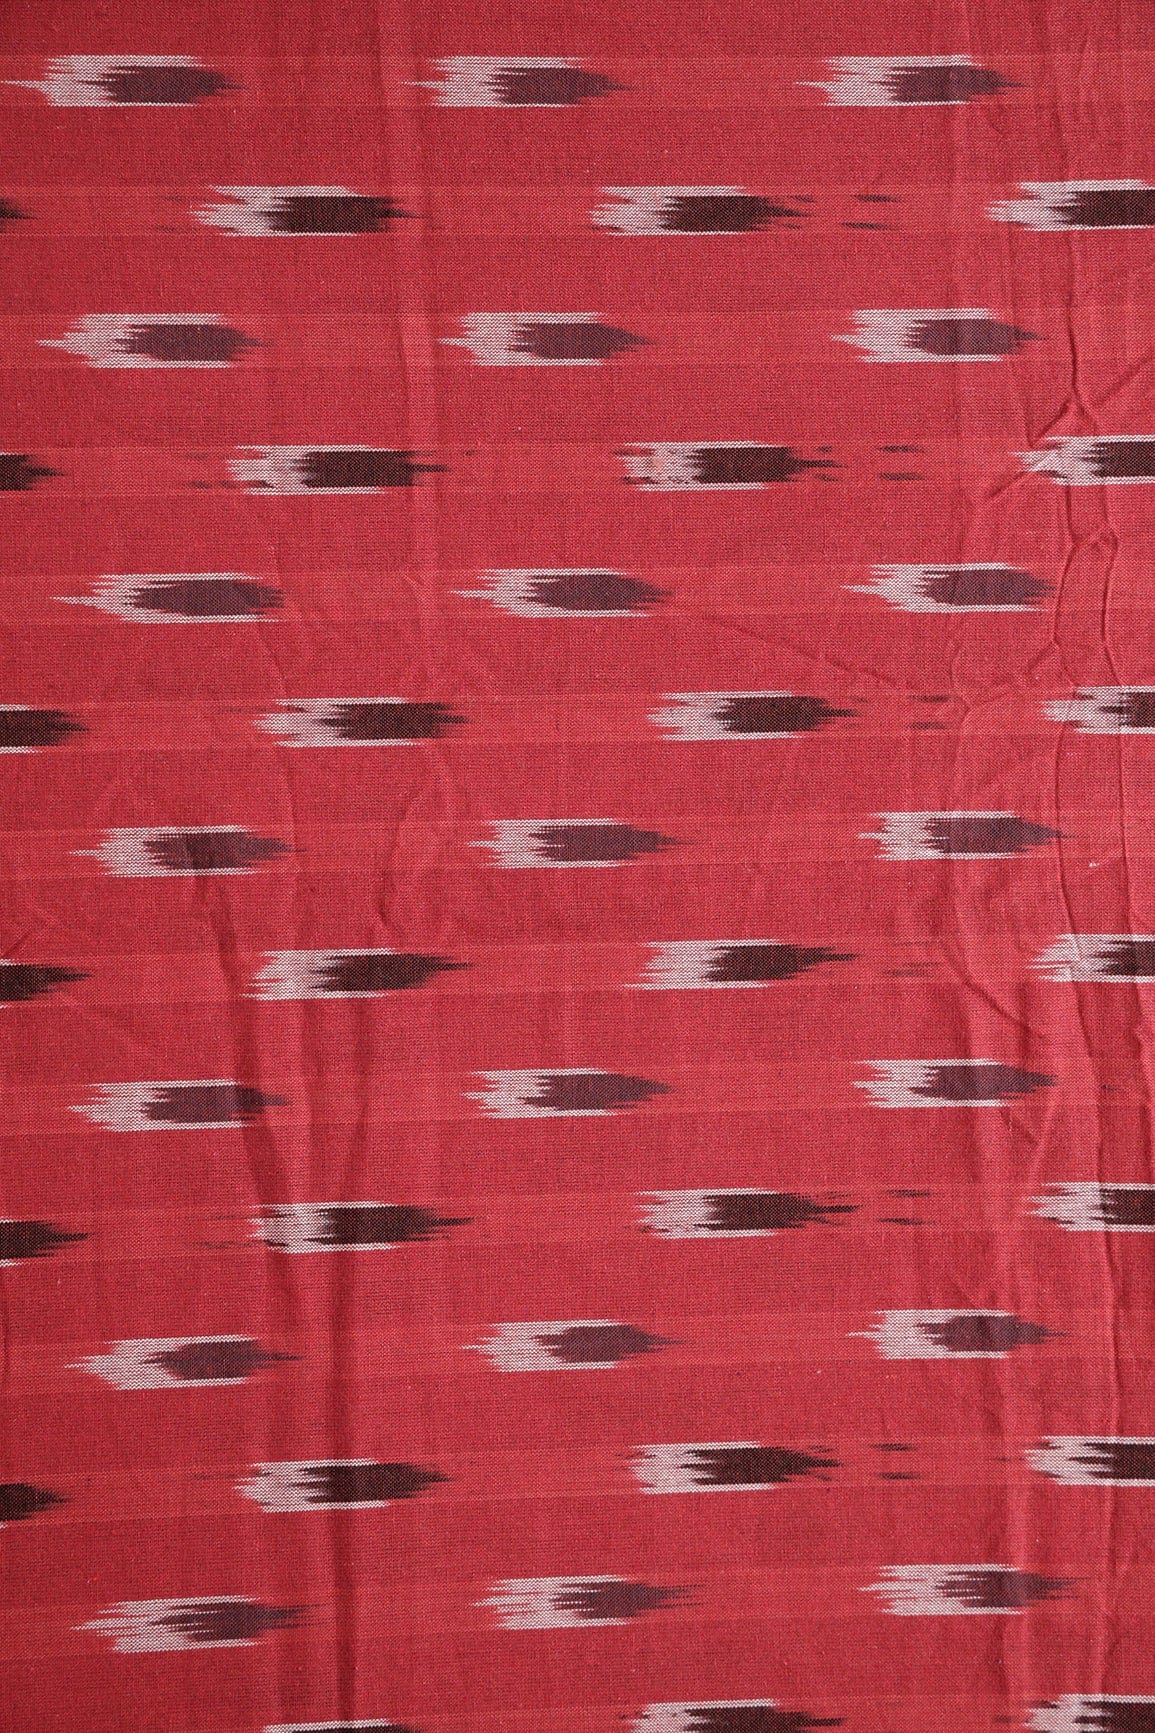 doeraa Hand Woven Red And Black Stripes Pattern Handwoven Ikat Organic Cotton Fabric